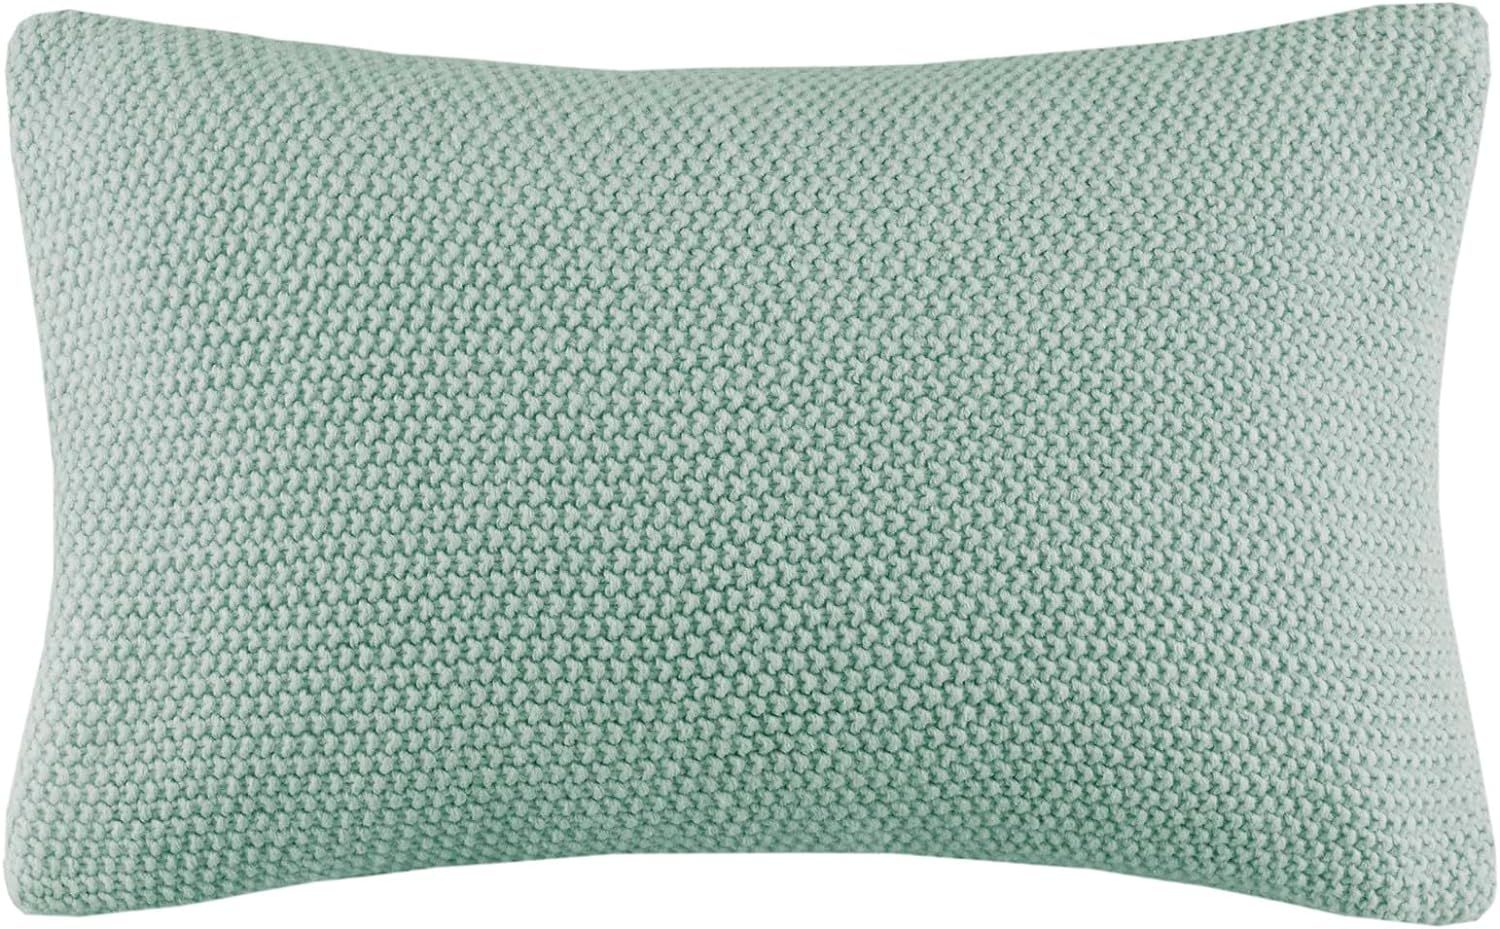 INK+IVY Bree Knit Throw Pillow Cover, Casual Oblong Decorative Pillow Cover, 12X20, Aqua | Amazon (US)